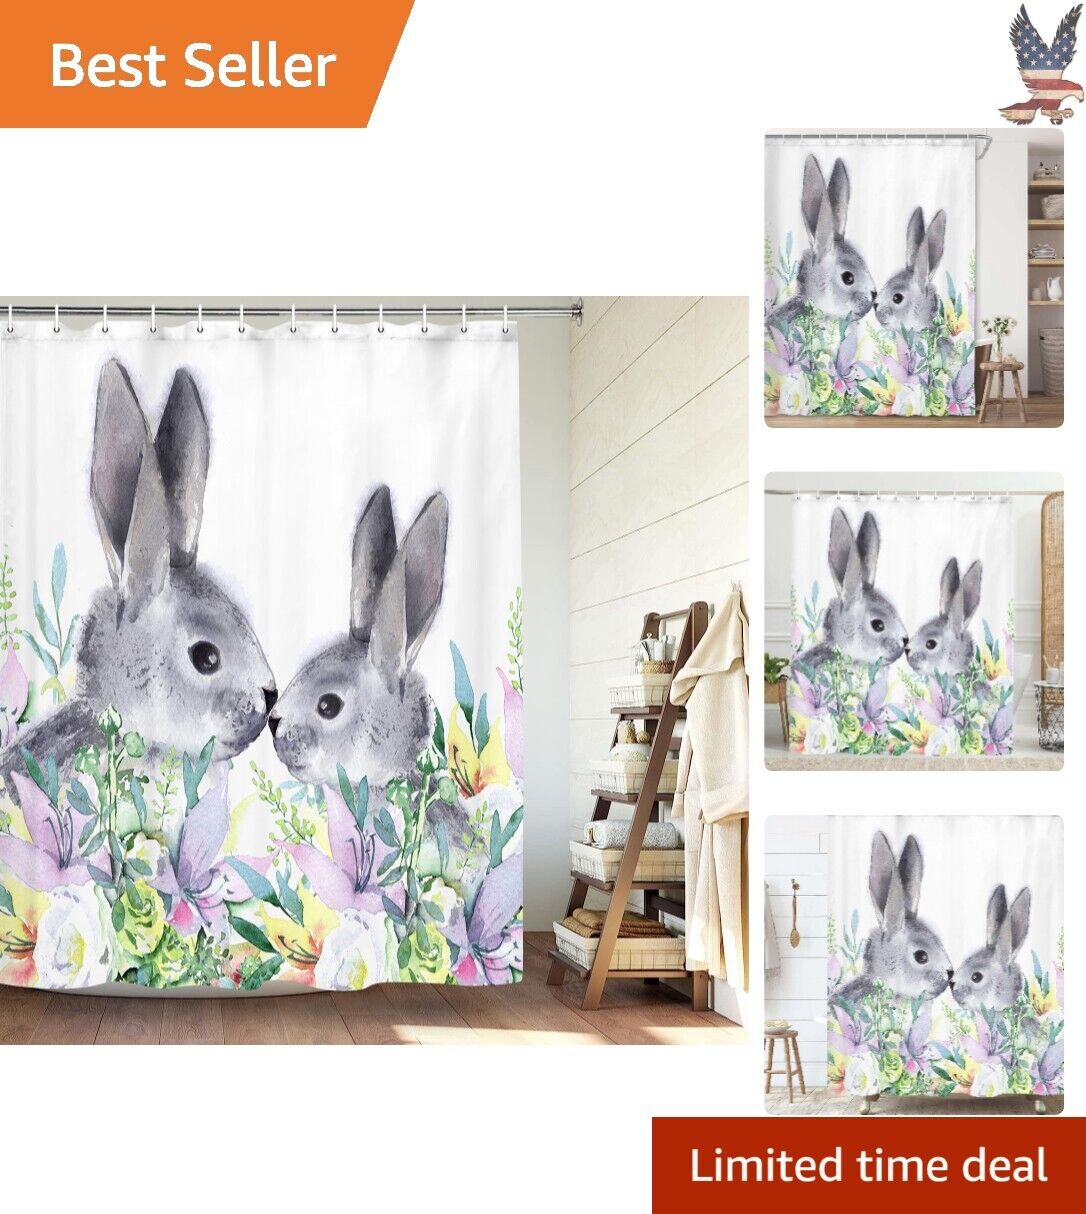 Easter Bunny Shower Curtain - Premium Durable Machine Washable - 69x70inches